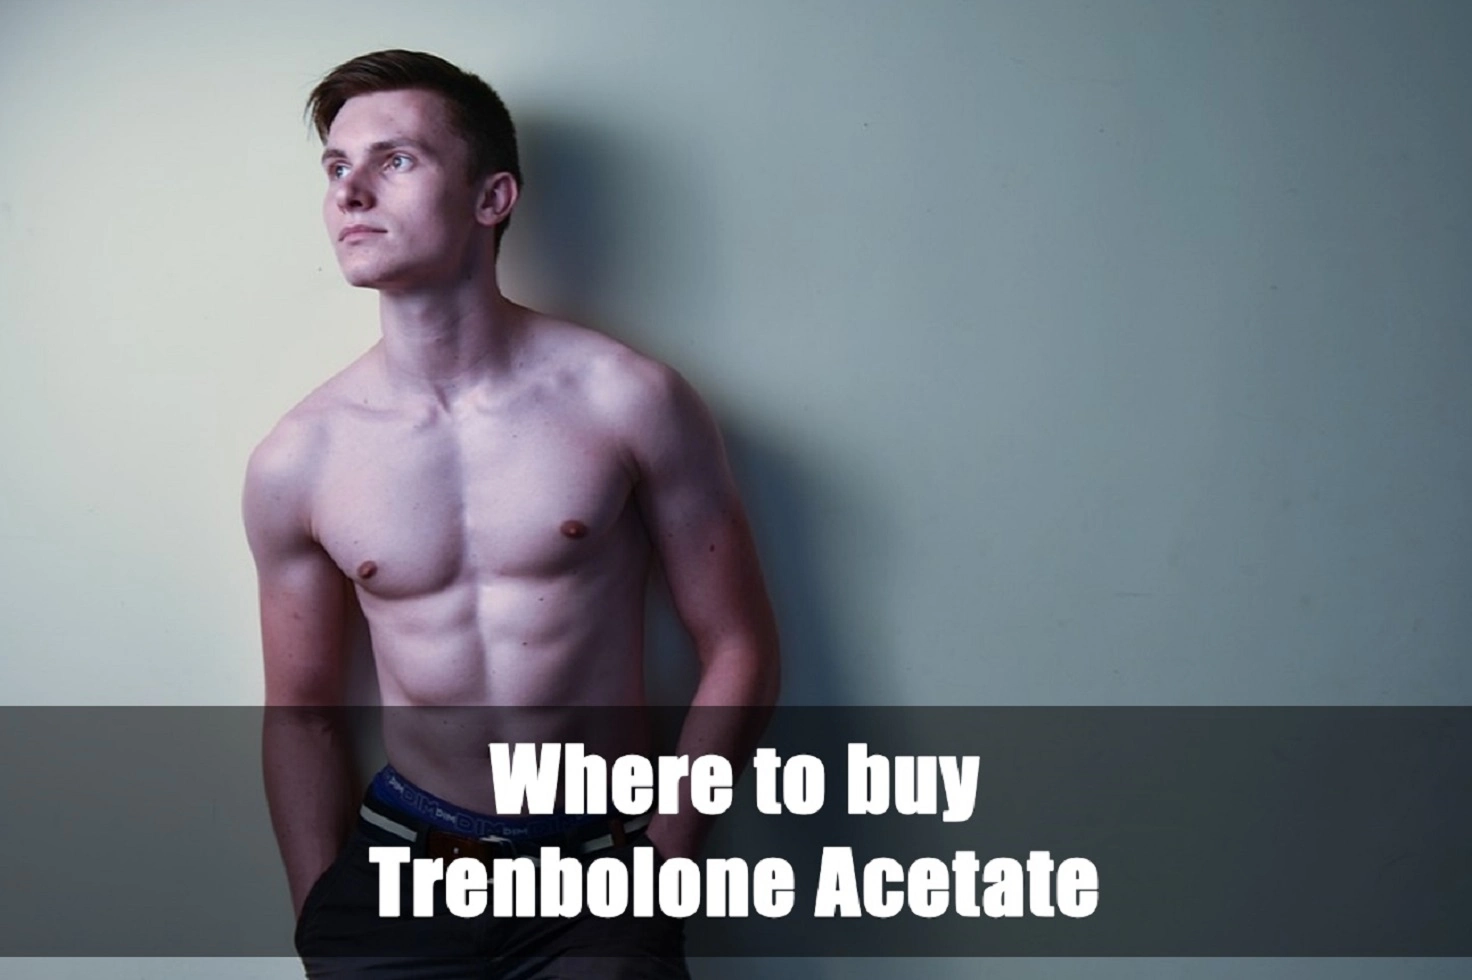 Where to buy Trenbolone Acetate